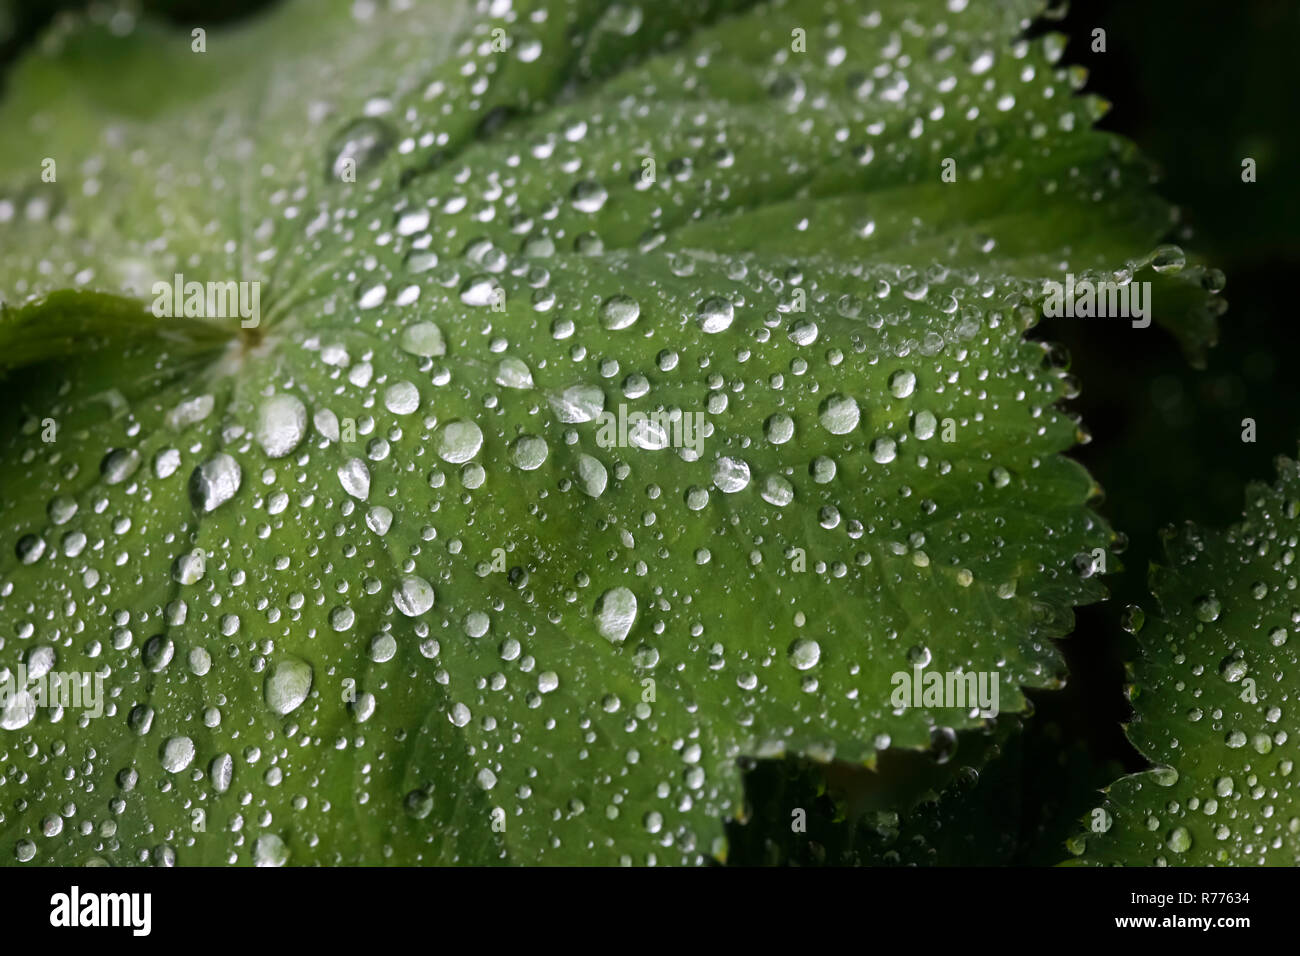 Common Lady's Mantle (Alchemilla vulgaris), water drops on a leaf, Germany Stock Photo